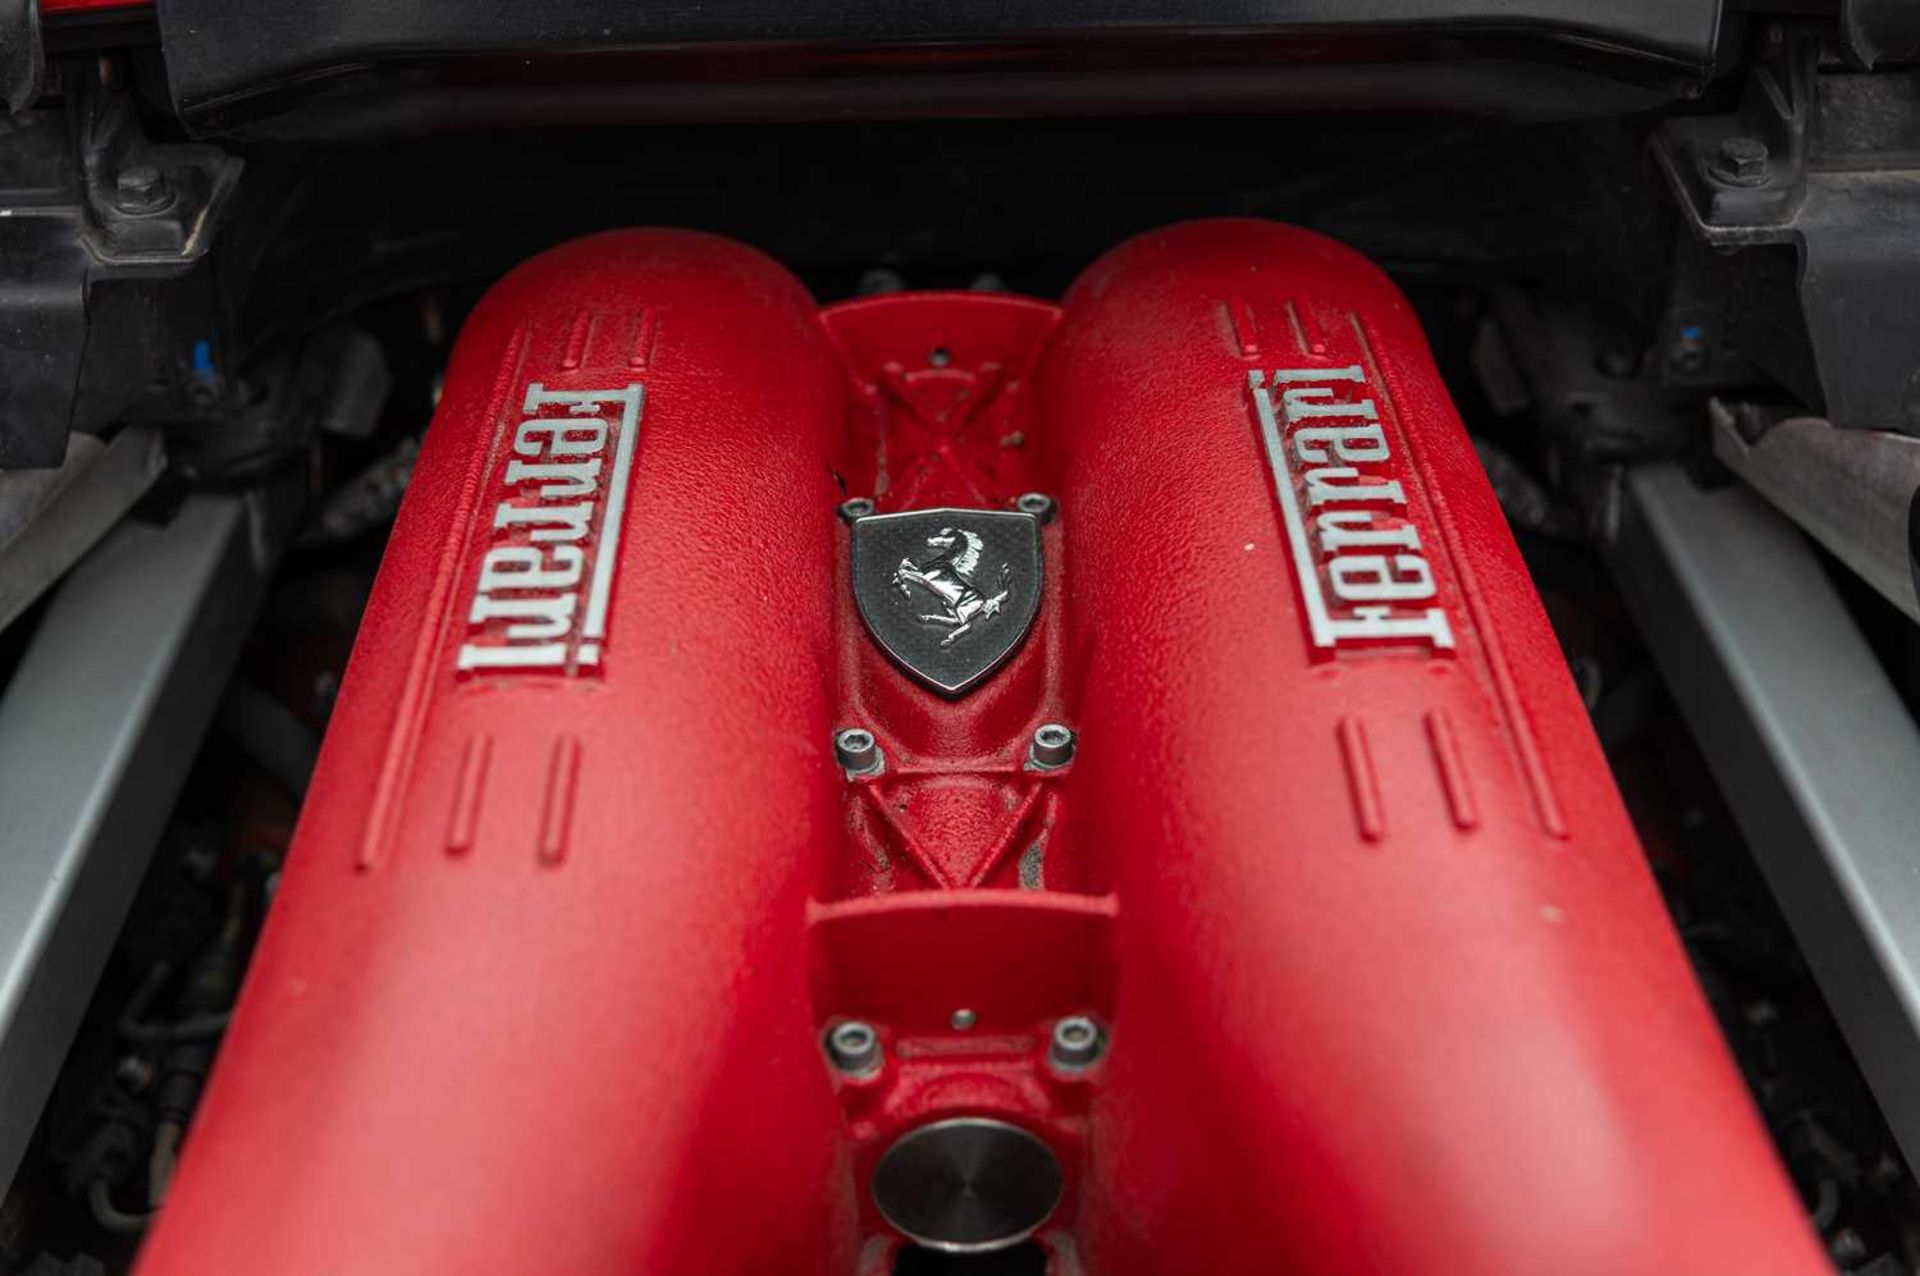 2005 Ferrari F430 Spider Well-specified F1 model finished in Rosso Corsa, over Crema with numerous c - Image 48 of 75